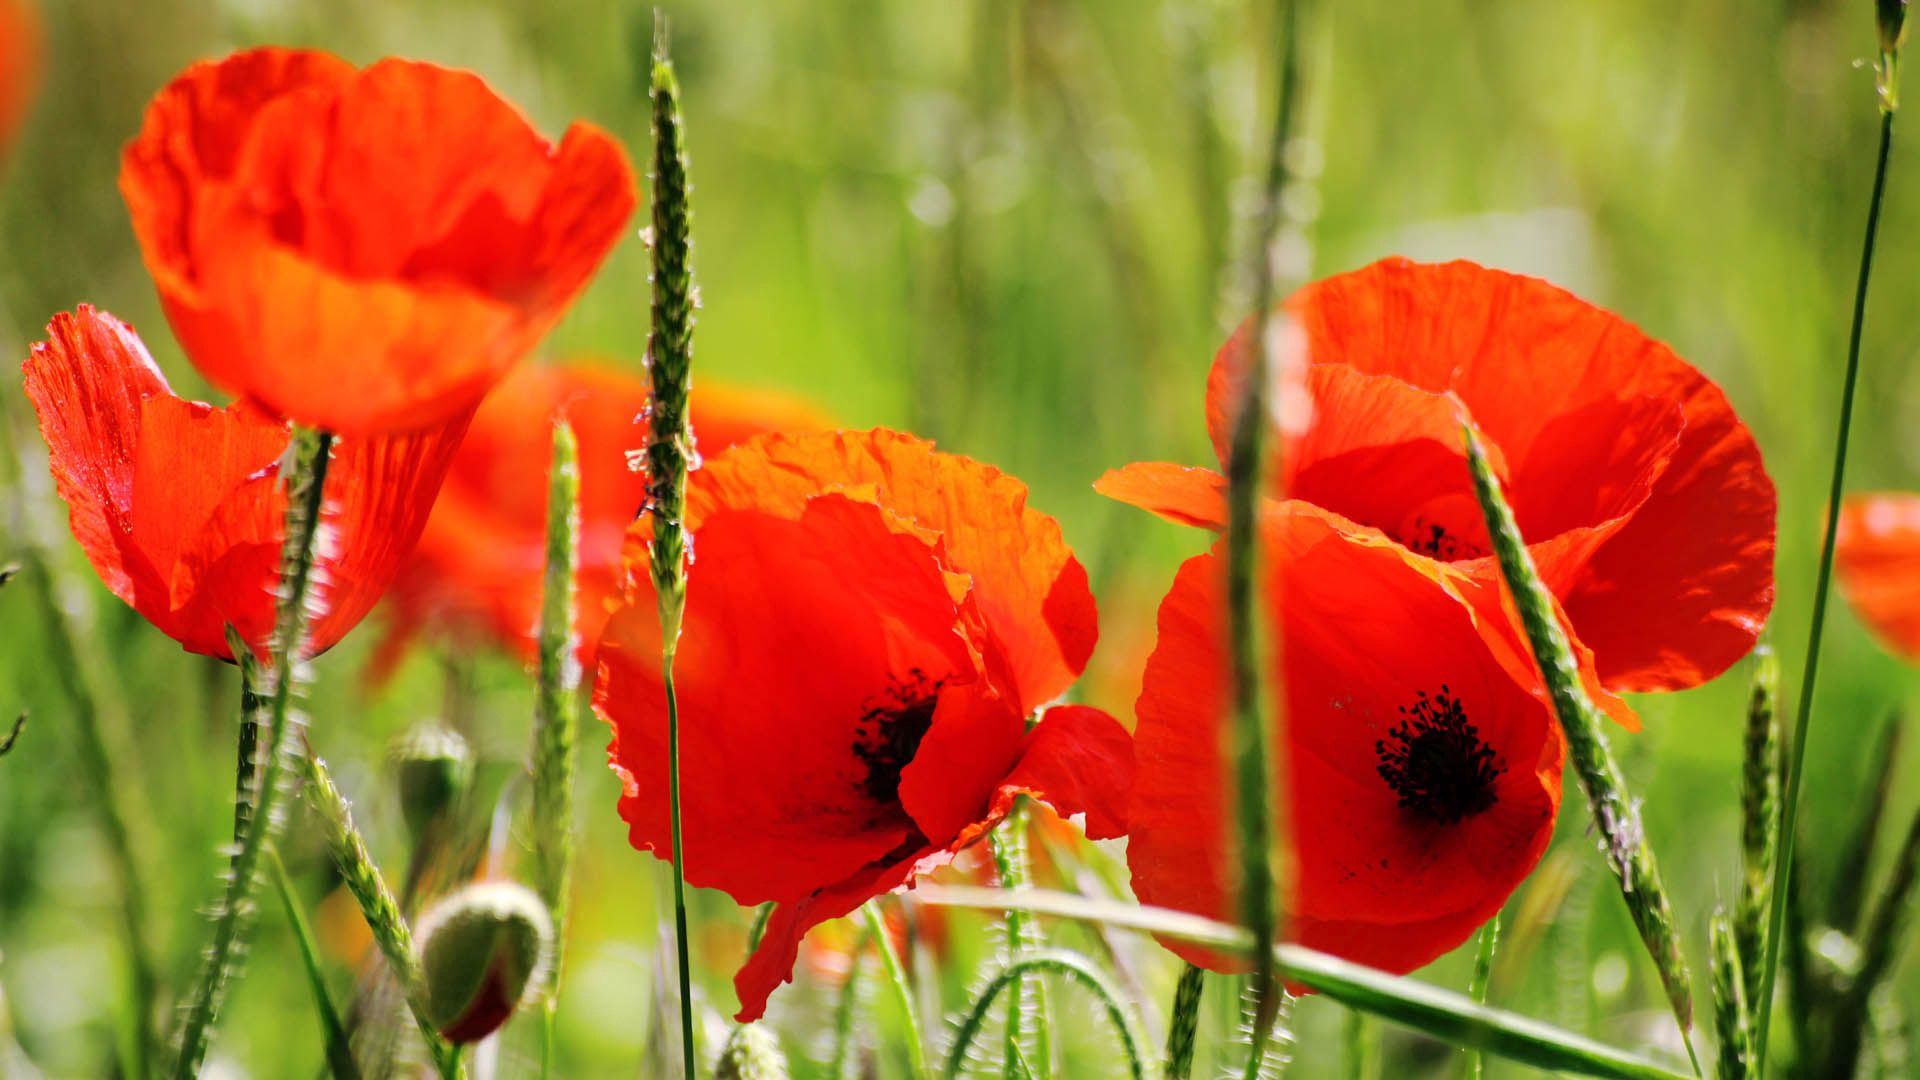 Windows Backgrounds petals, flowers, poppies, red, stem, stalk